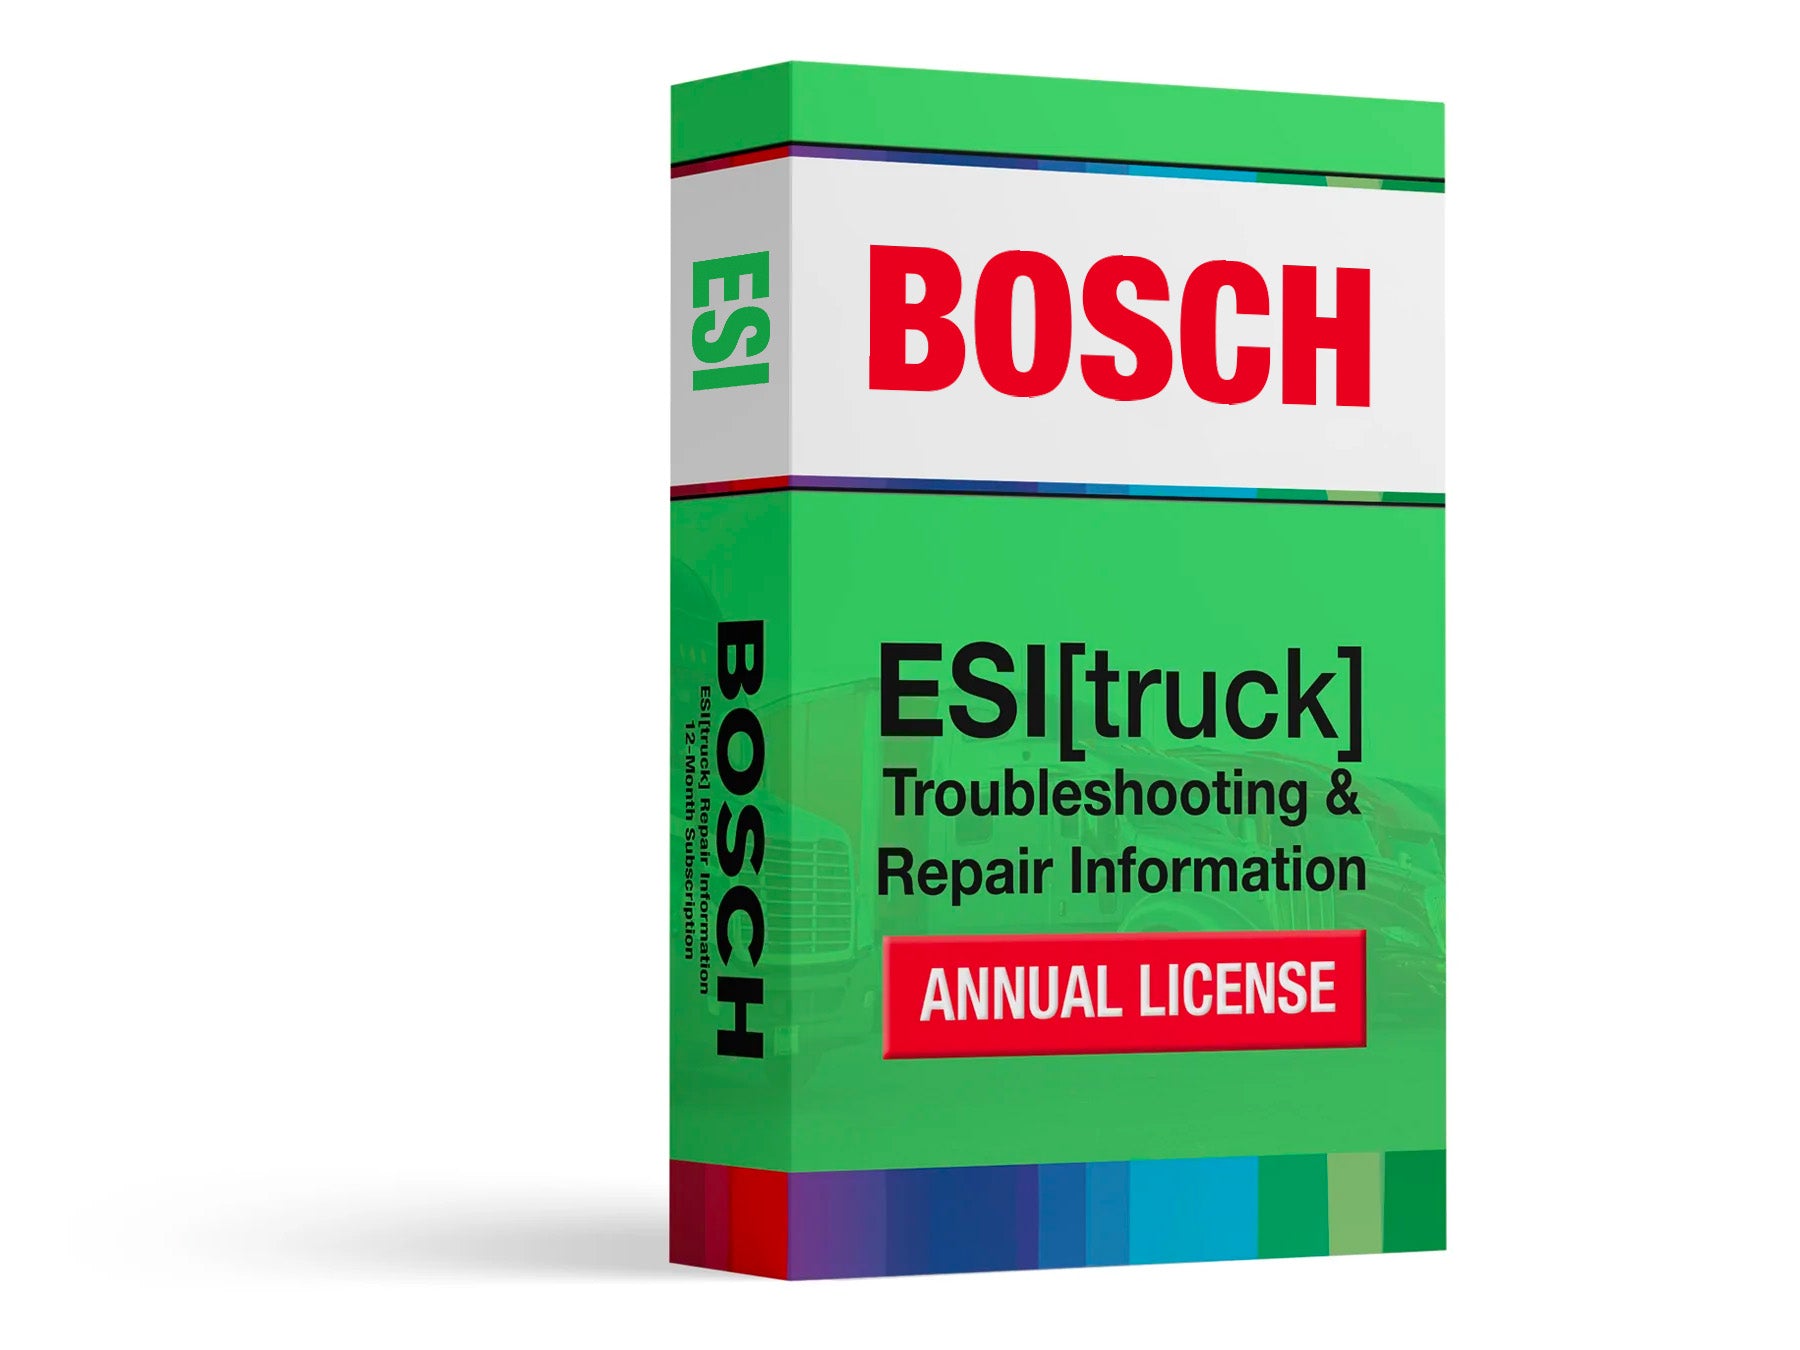 Bosch ESI Truck Troubleshooting and Repair Information